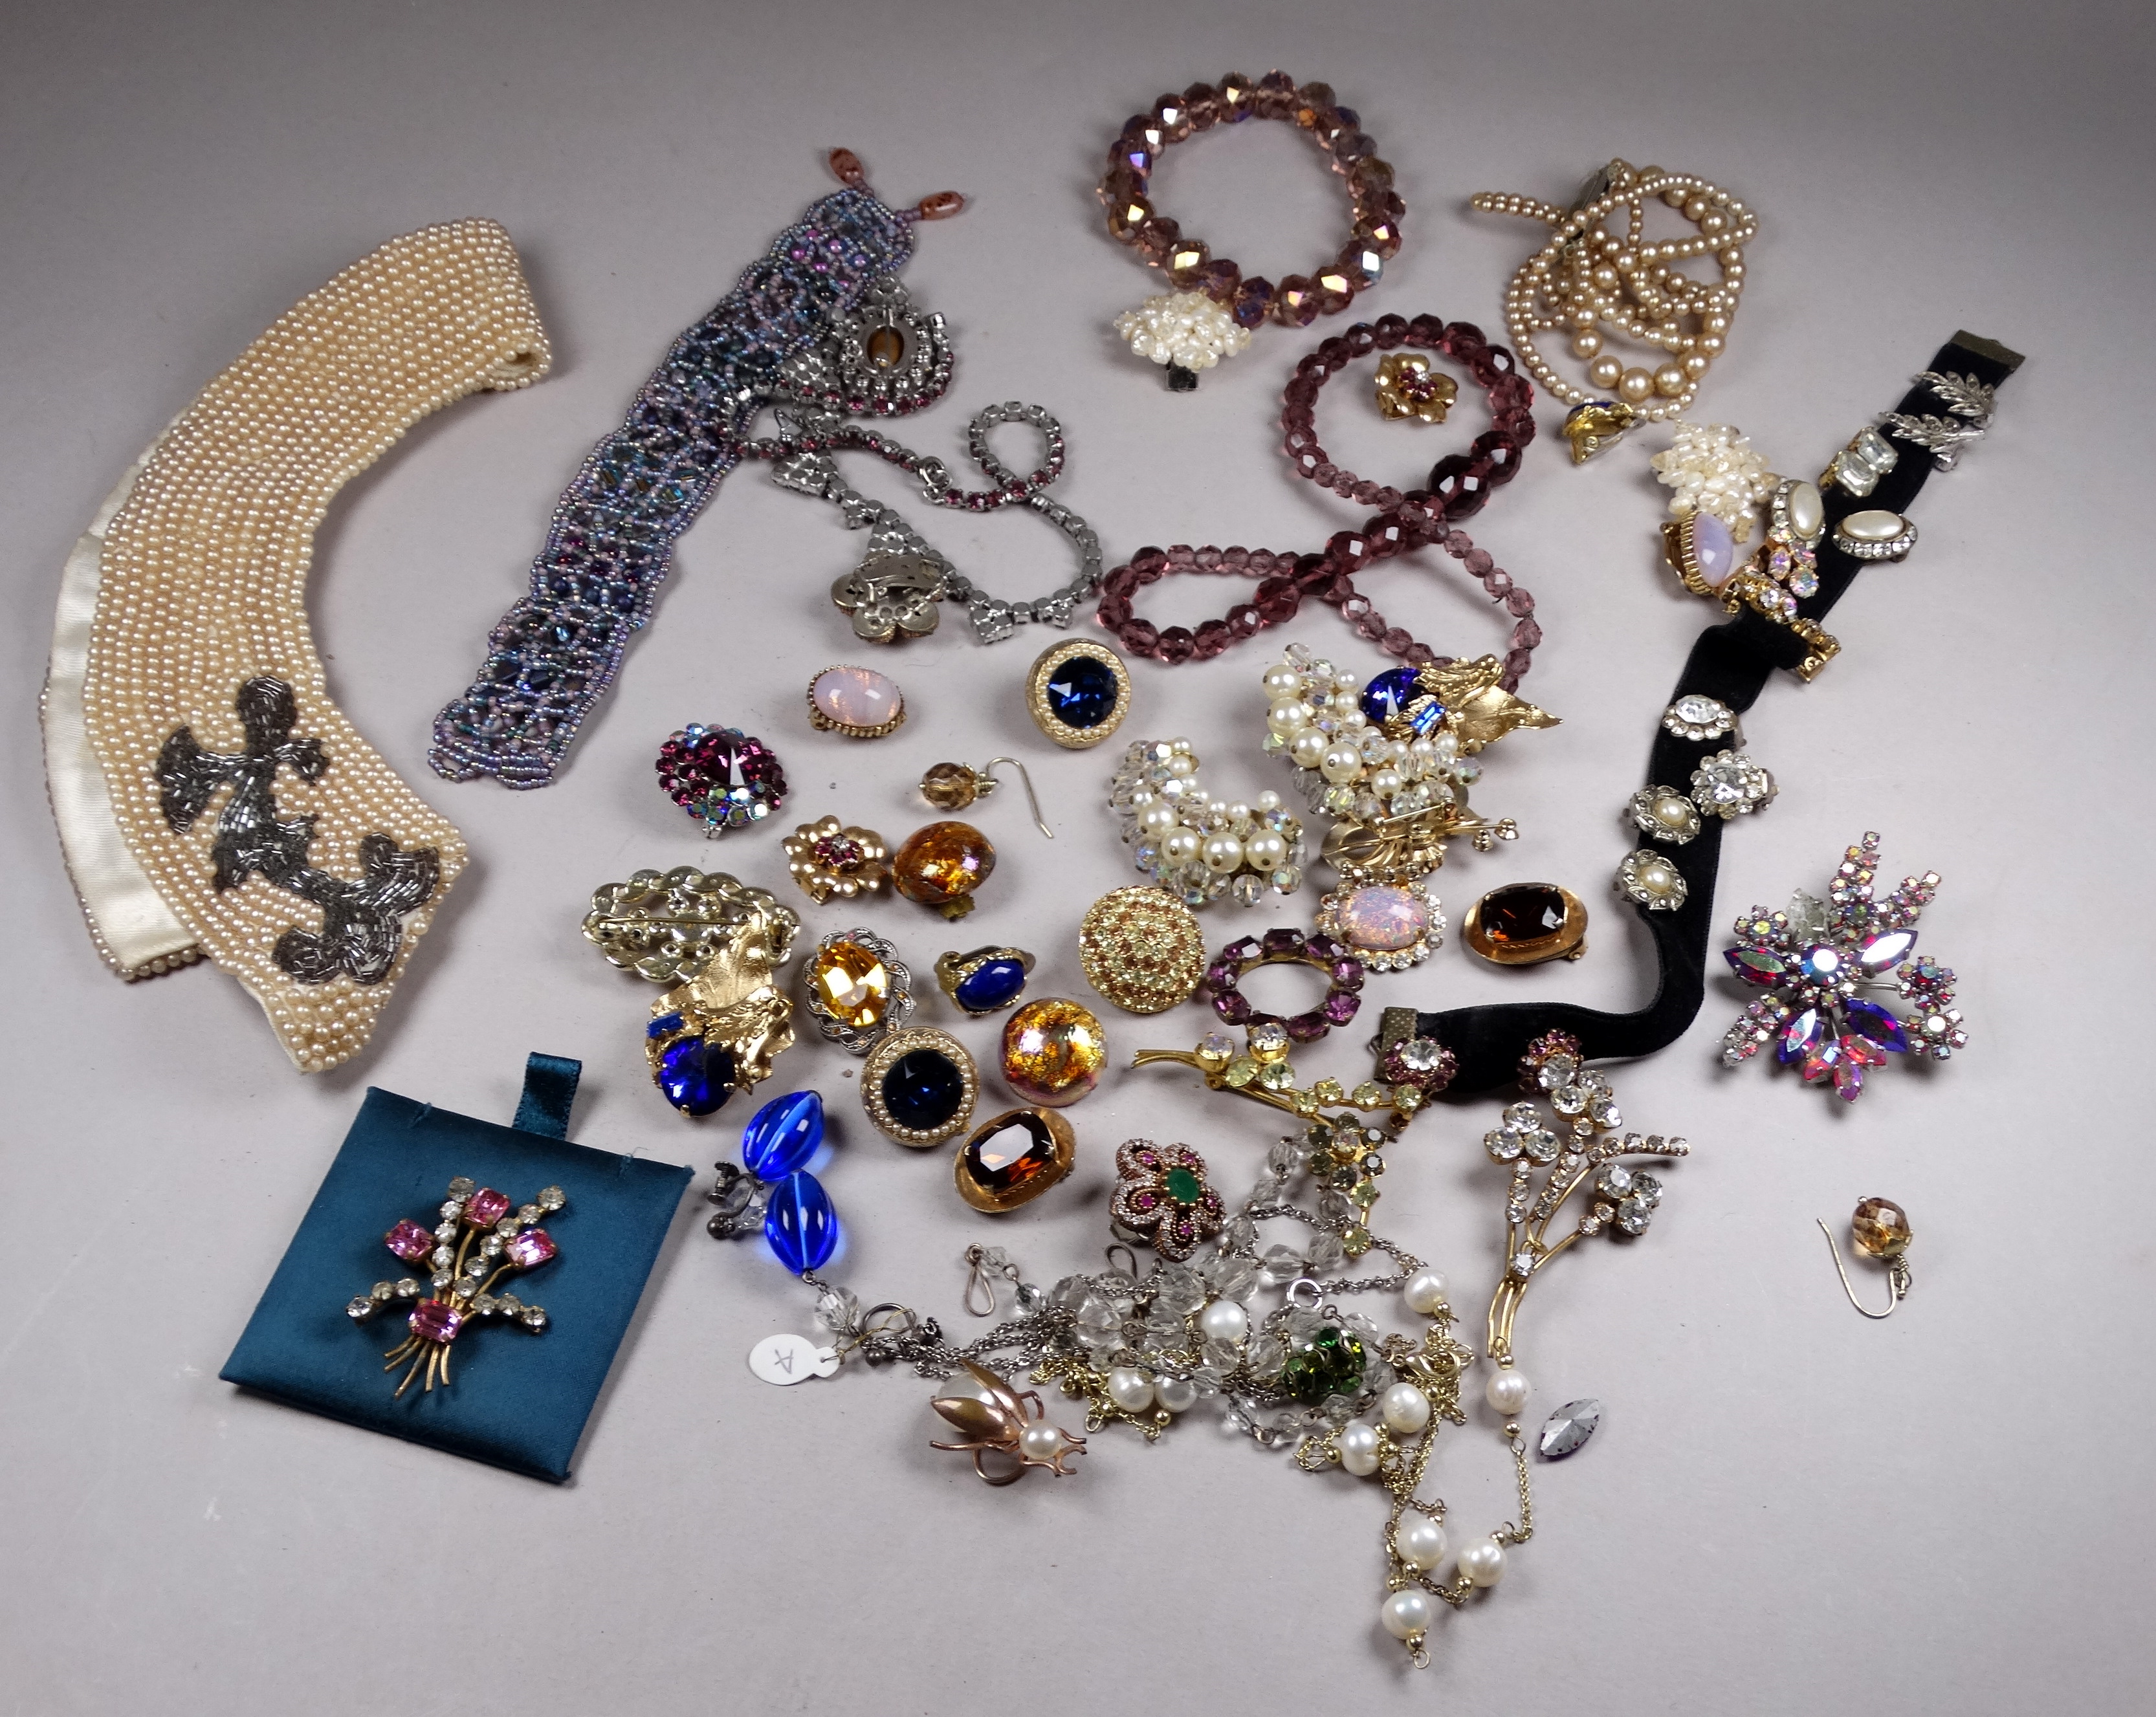 A quantity of costume jewellery - including a faux pearl collar.